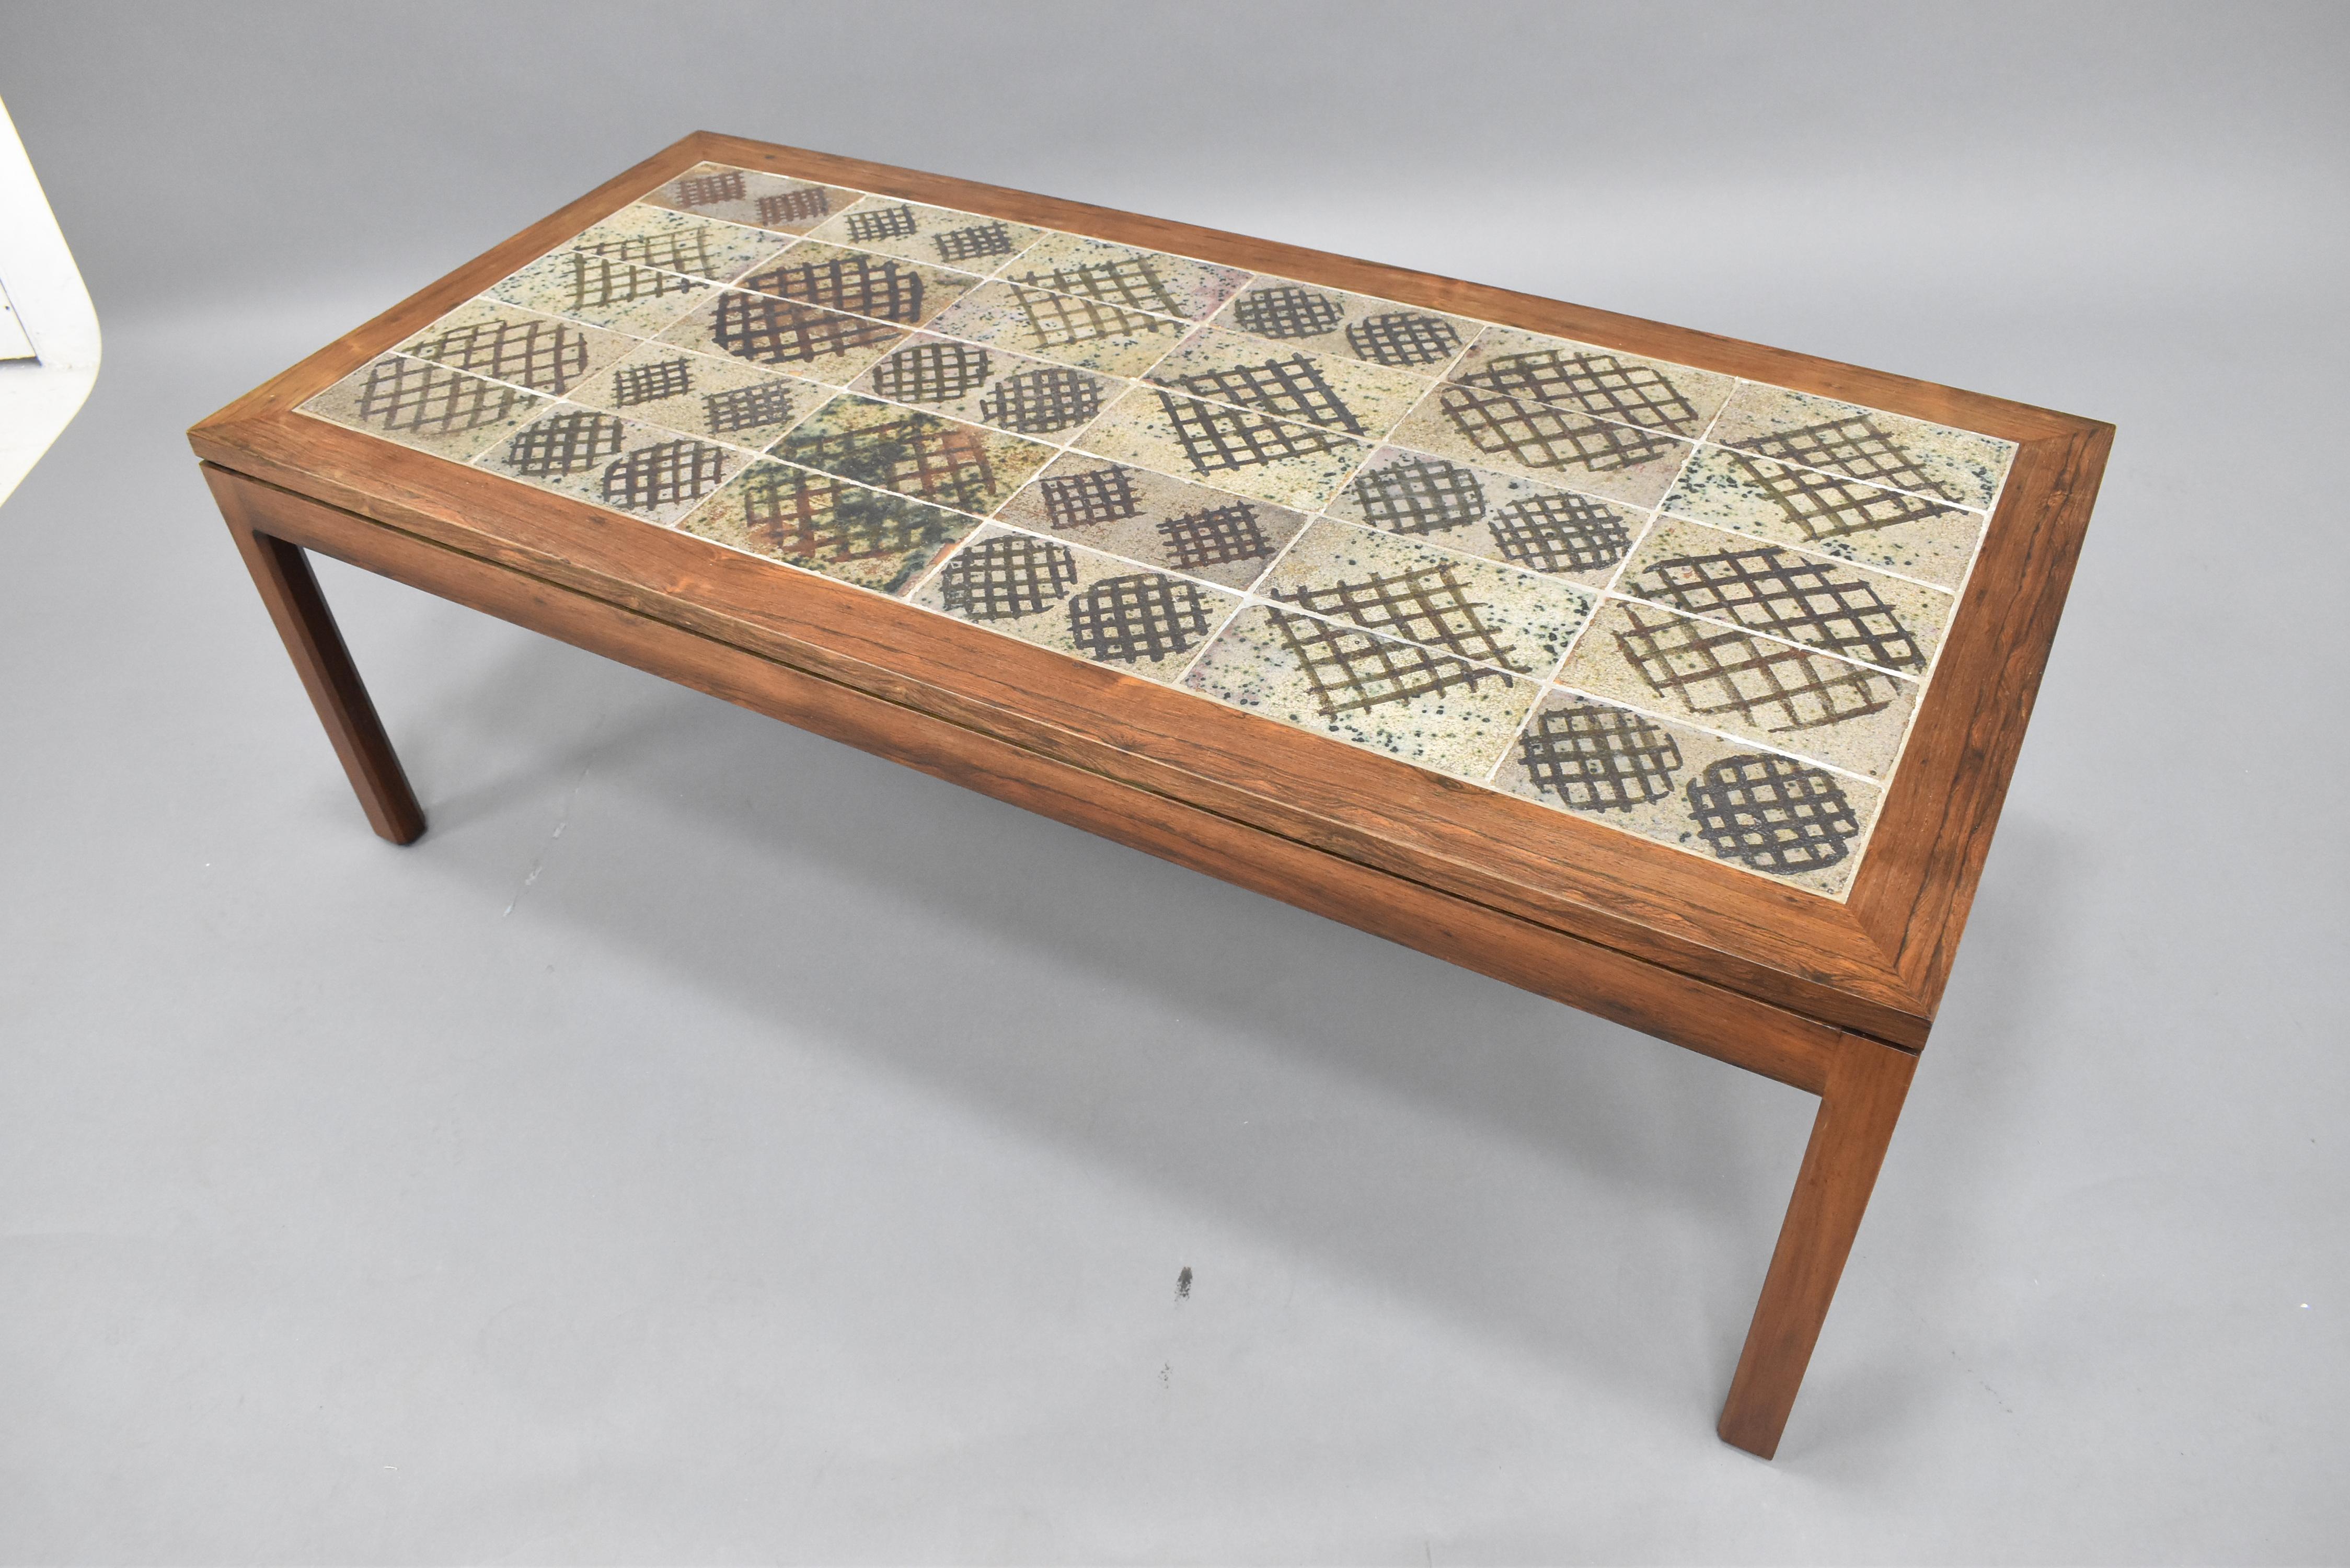 Very nice vintage coffee table executed in solid Rosewood with a beautiful ceramic tile top. Table frame is solid and raised on four legs, the tabletop has a slight reveal that appears to the top look like a floating slab on top of the base. The top